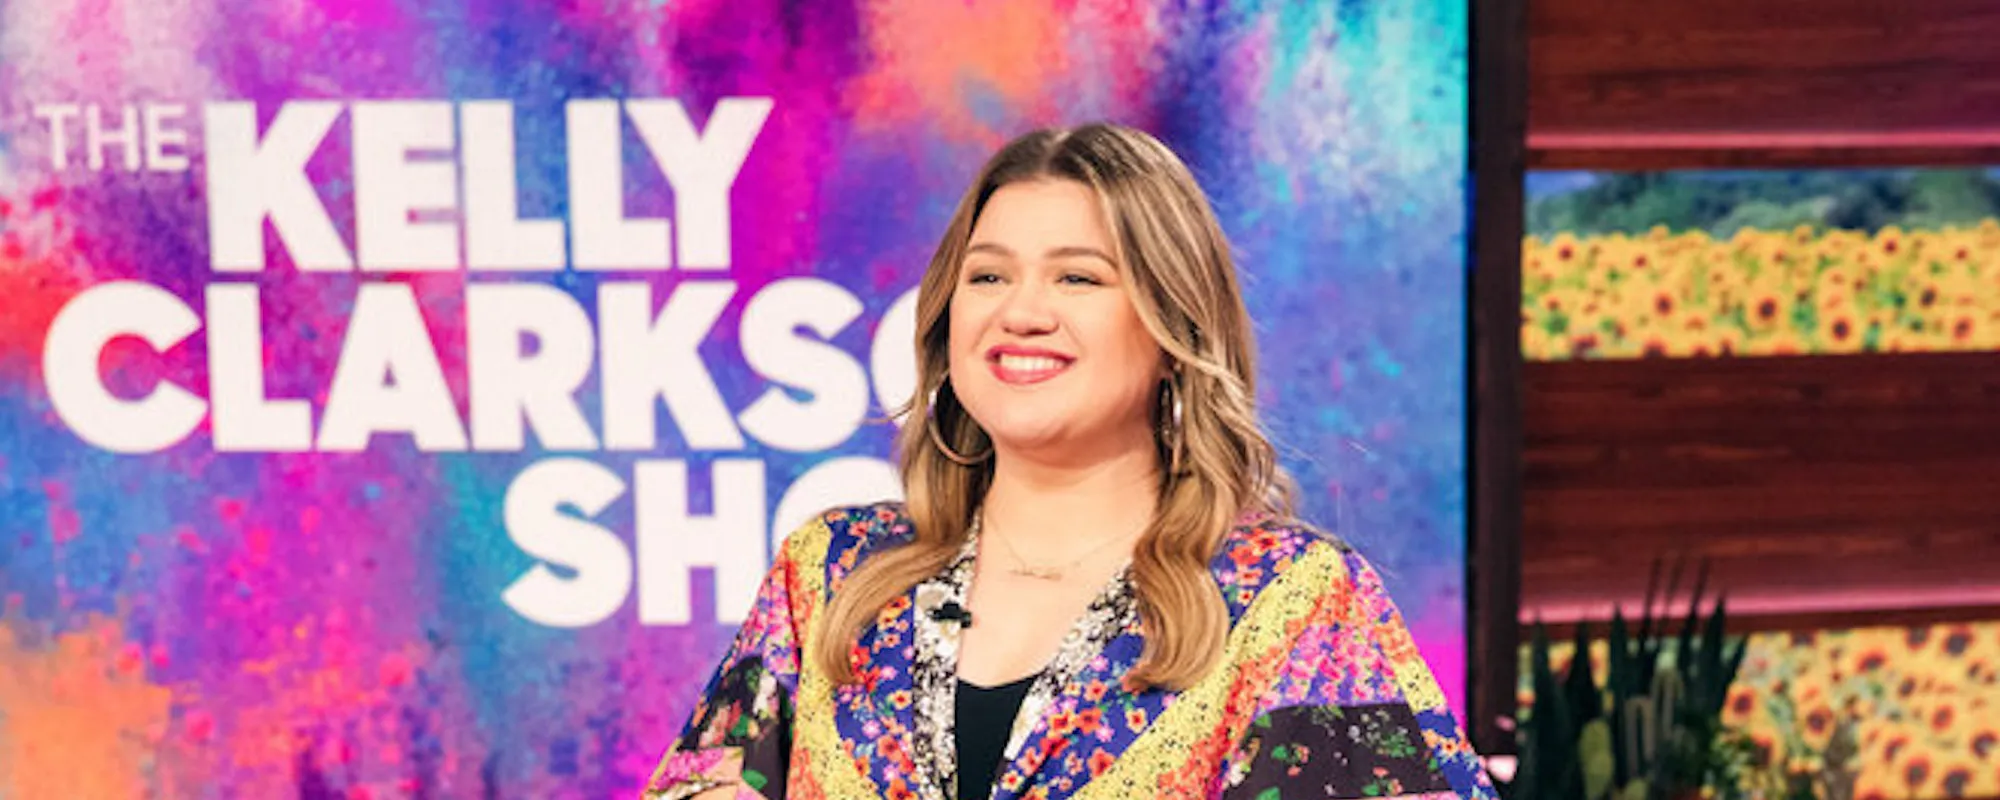 Kelly Clarkson Covers Dolly Parton’s “Jolene” and More